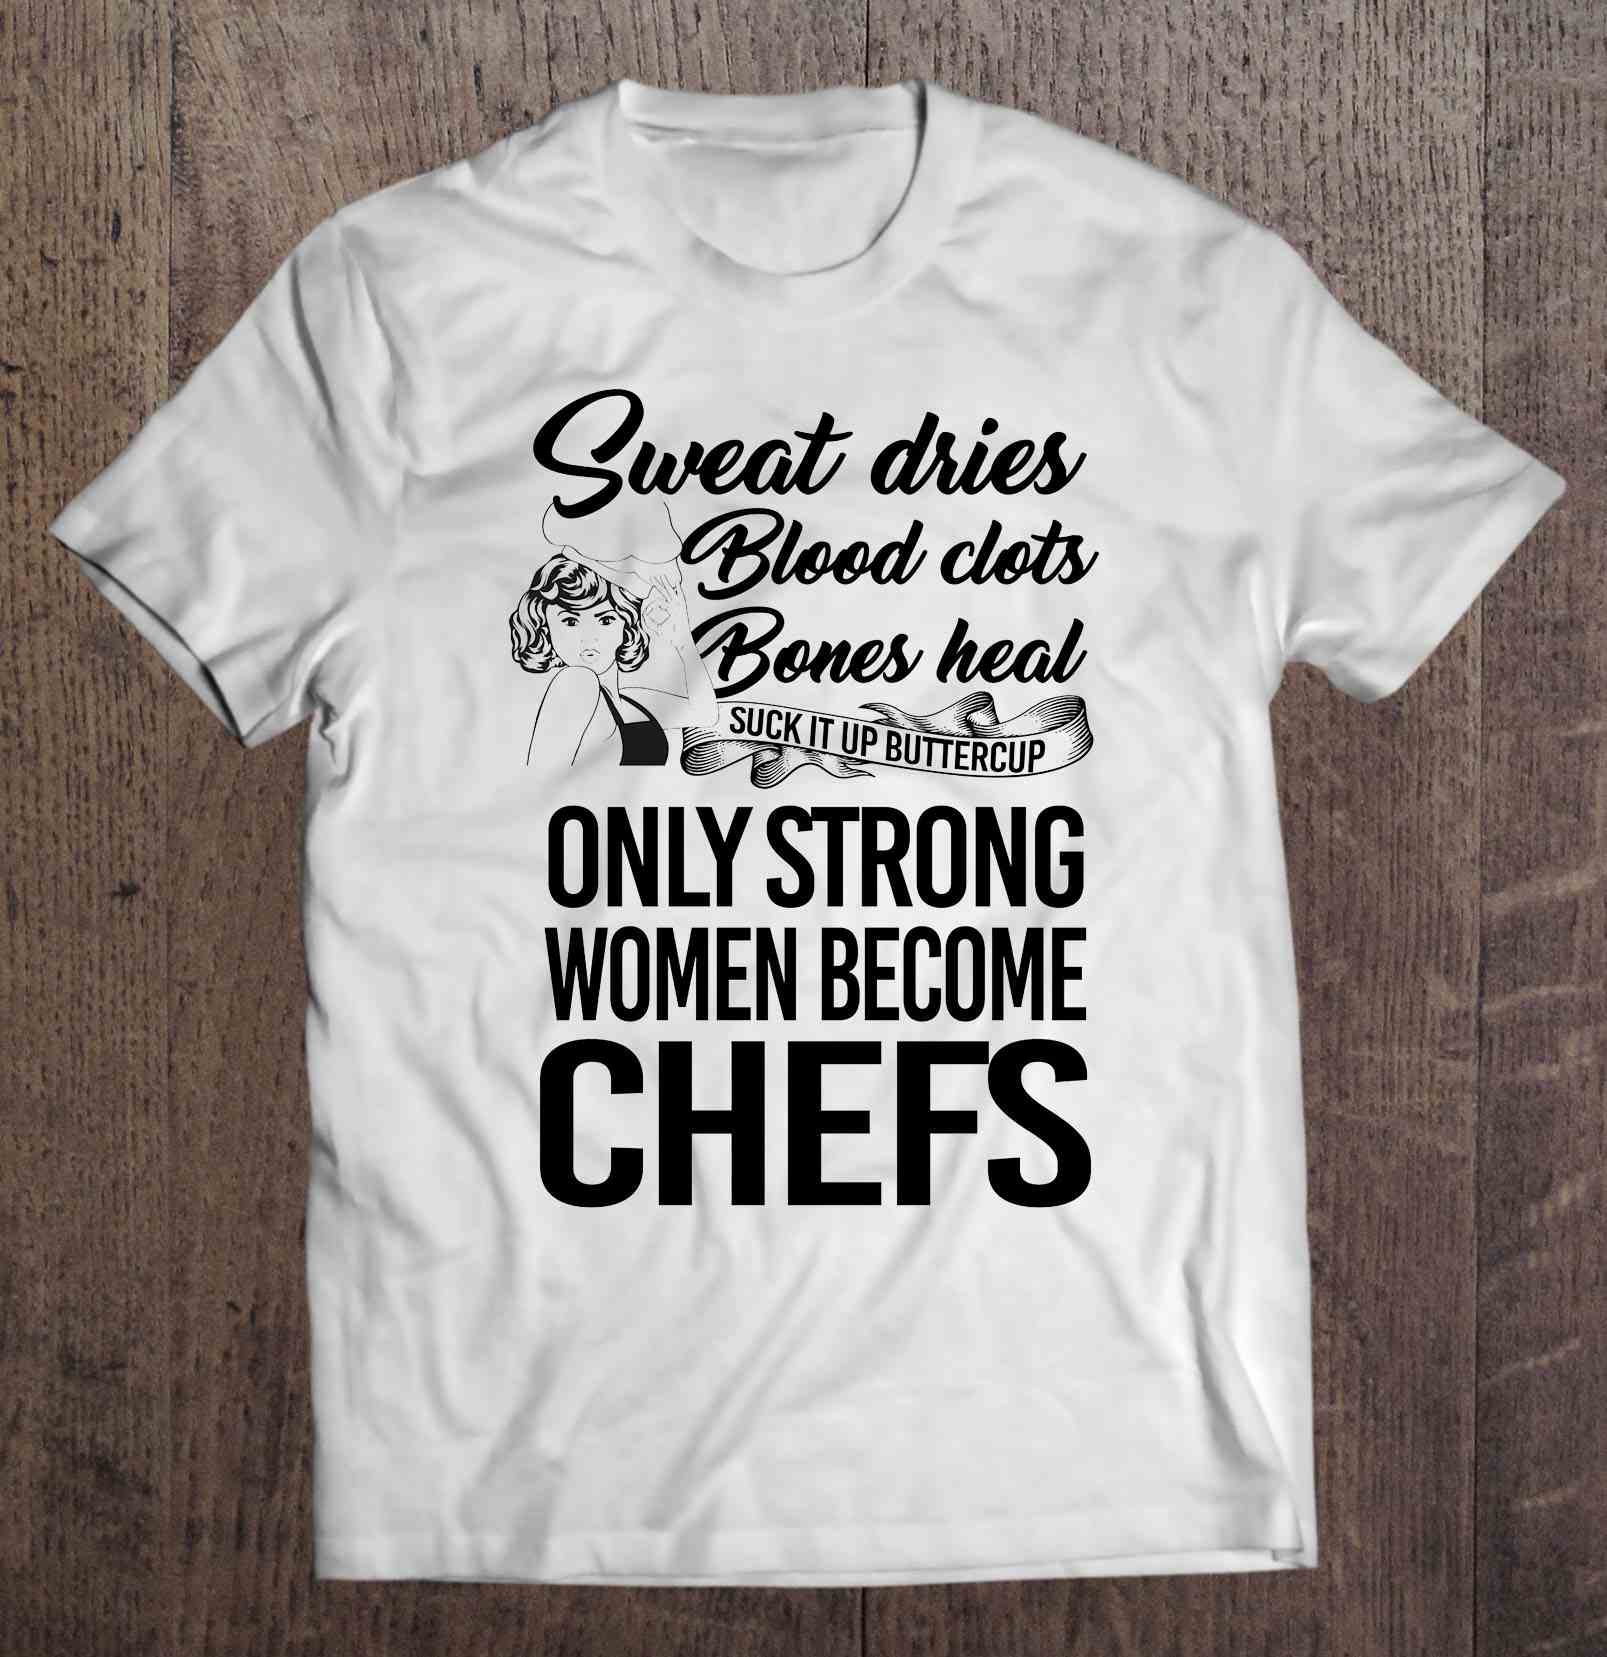 Sweat Dries Blood Clots Bones Heal Suck It Up Buttercup Only Strong Women Become Chefs Shirt Gift Black Man Size Up To 5xl